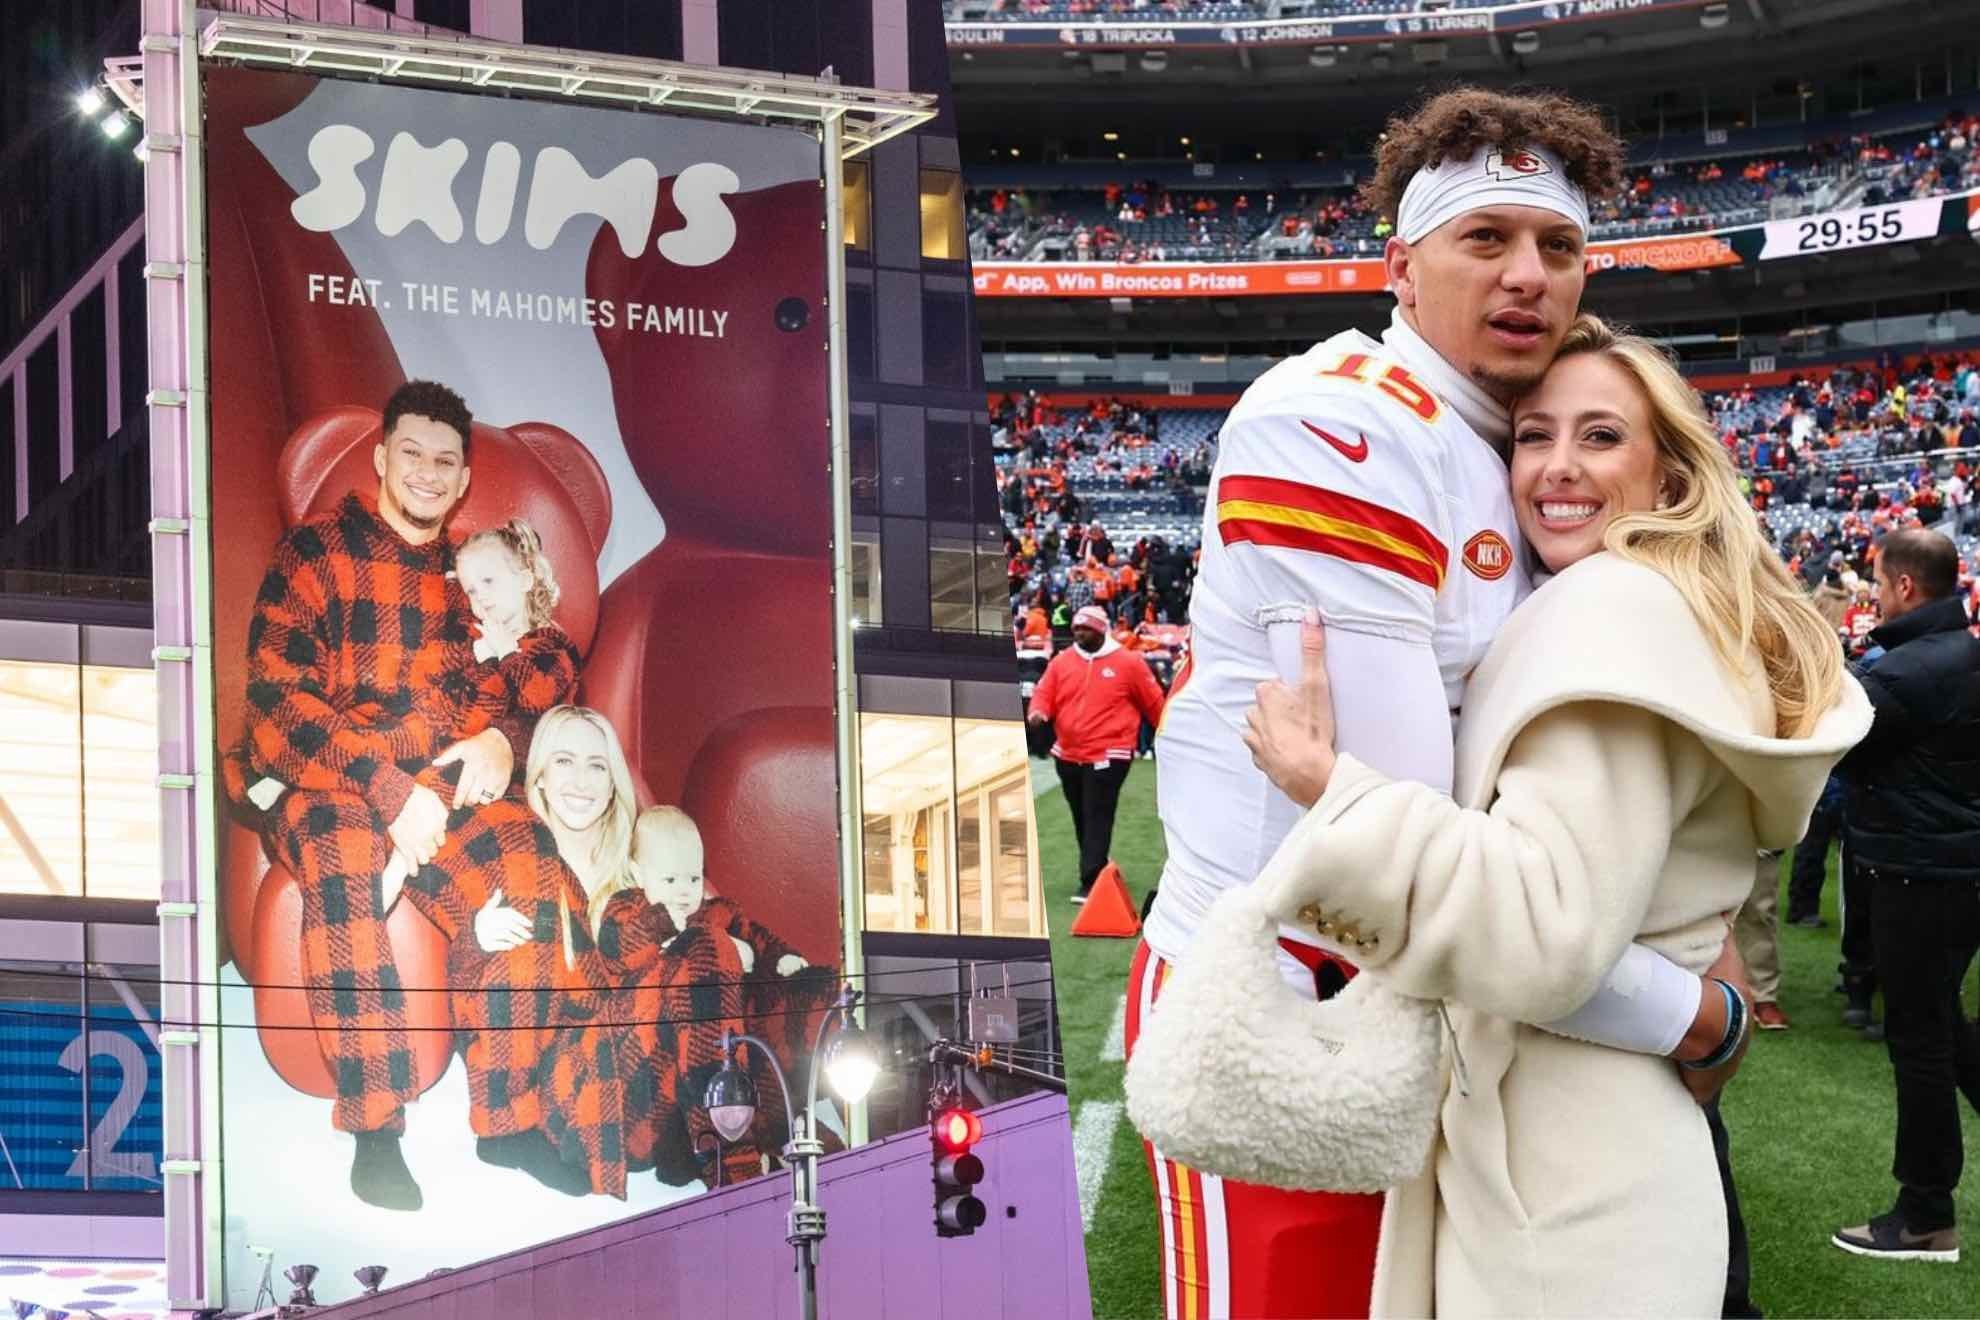 Patrick and Brittany Mahomes featured in New York City